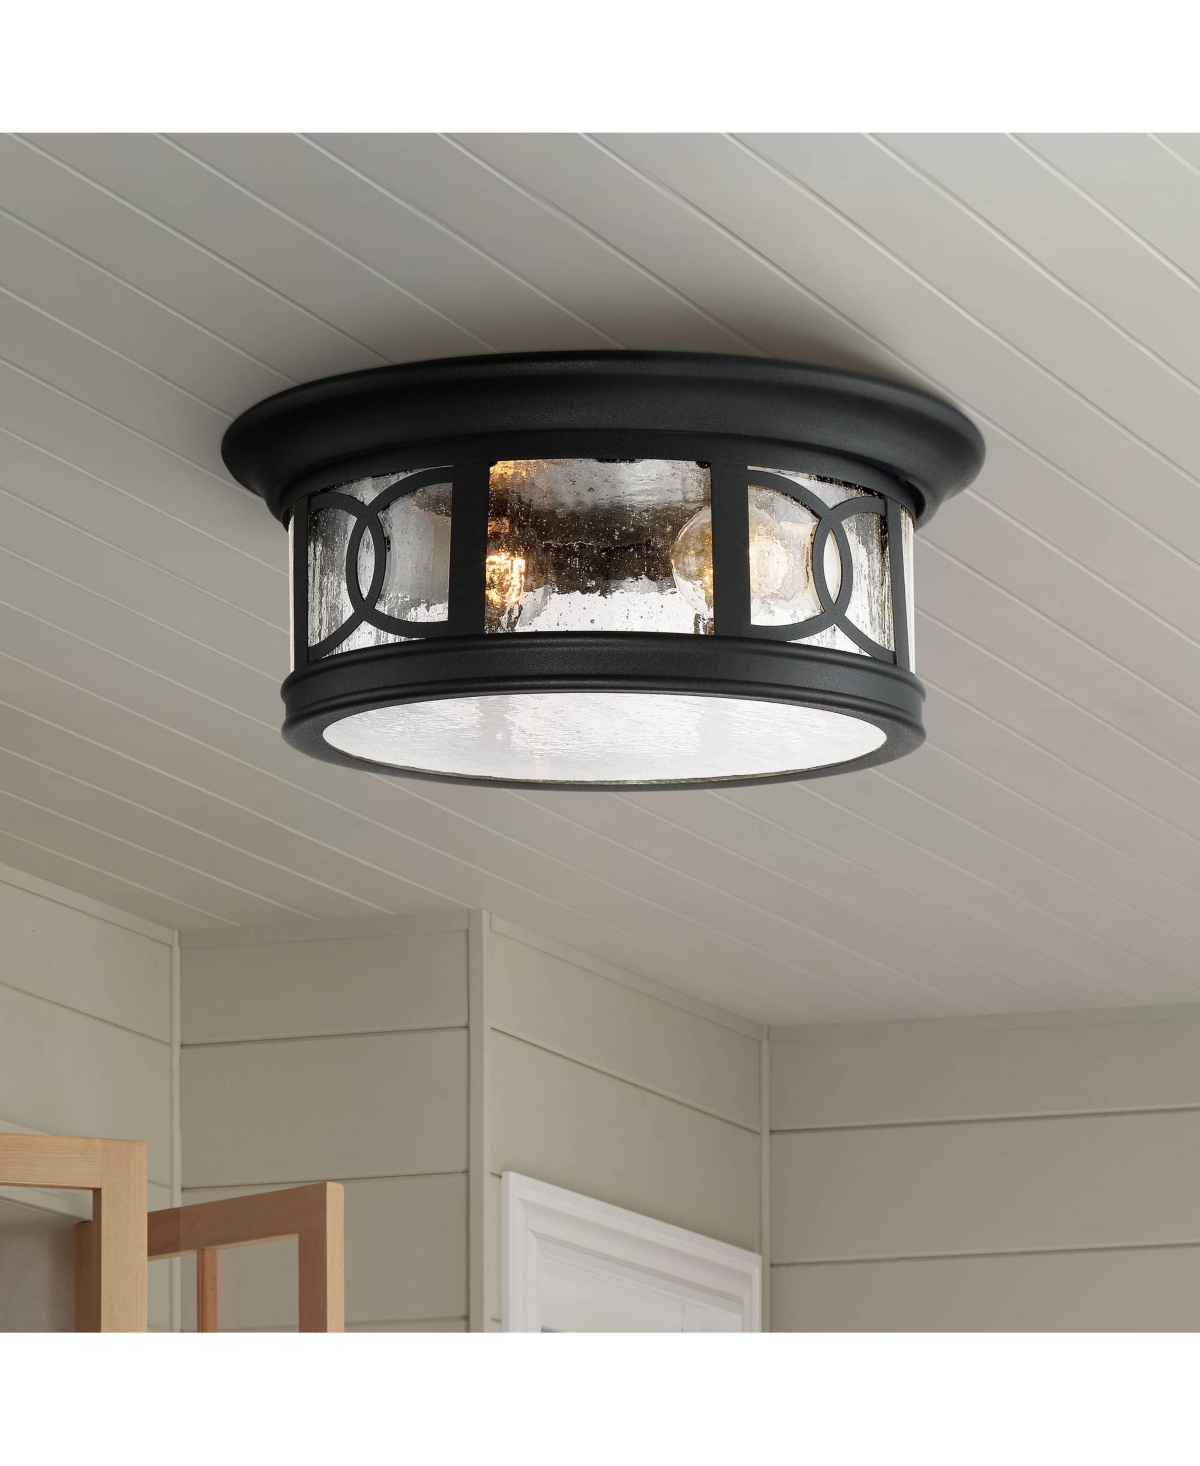 Capistrano Mission Flush-Mount Outdoor Ceiling Light Fixture Black 12" Seedy Glass Damp Rated for Exterior House Porch Patio Outside Deck Garage Front